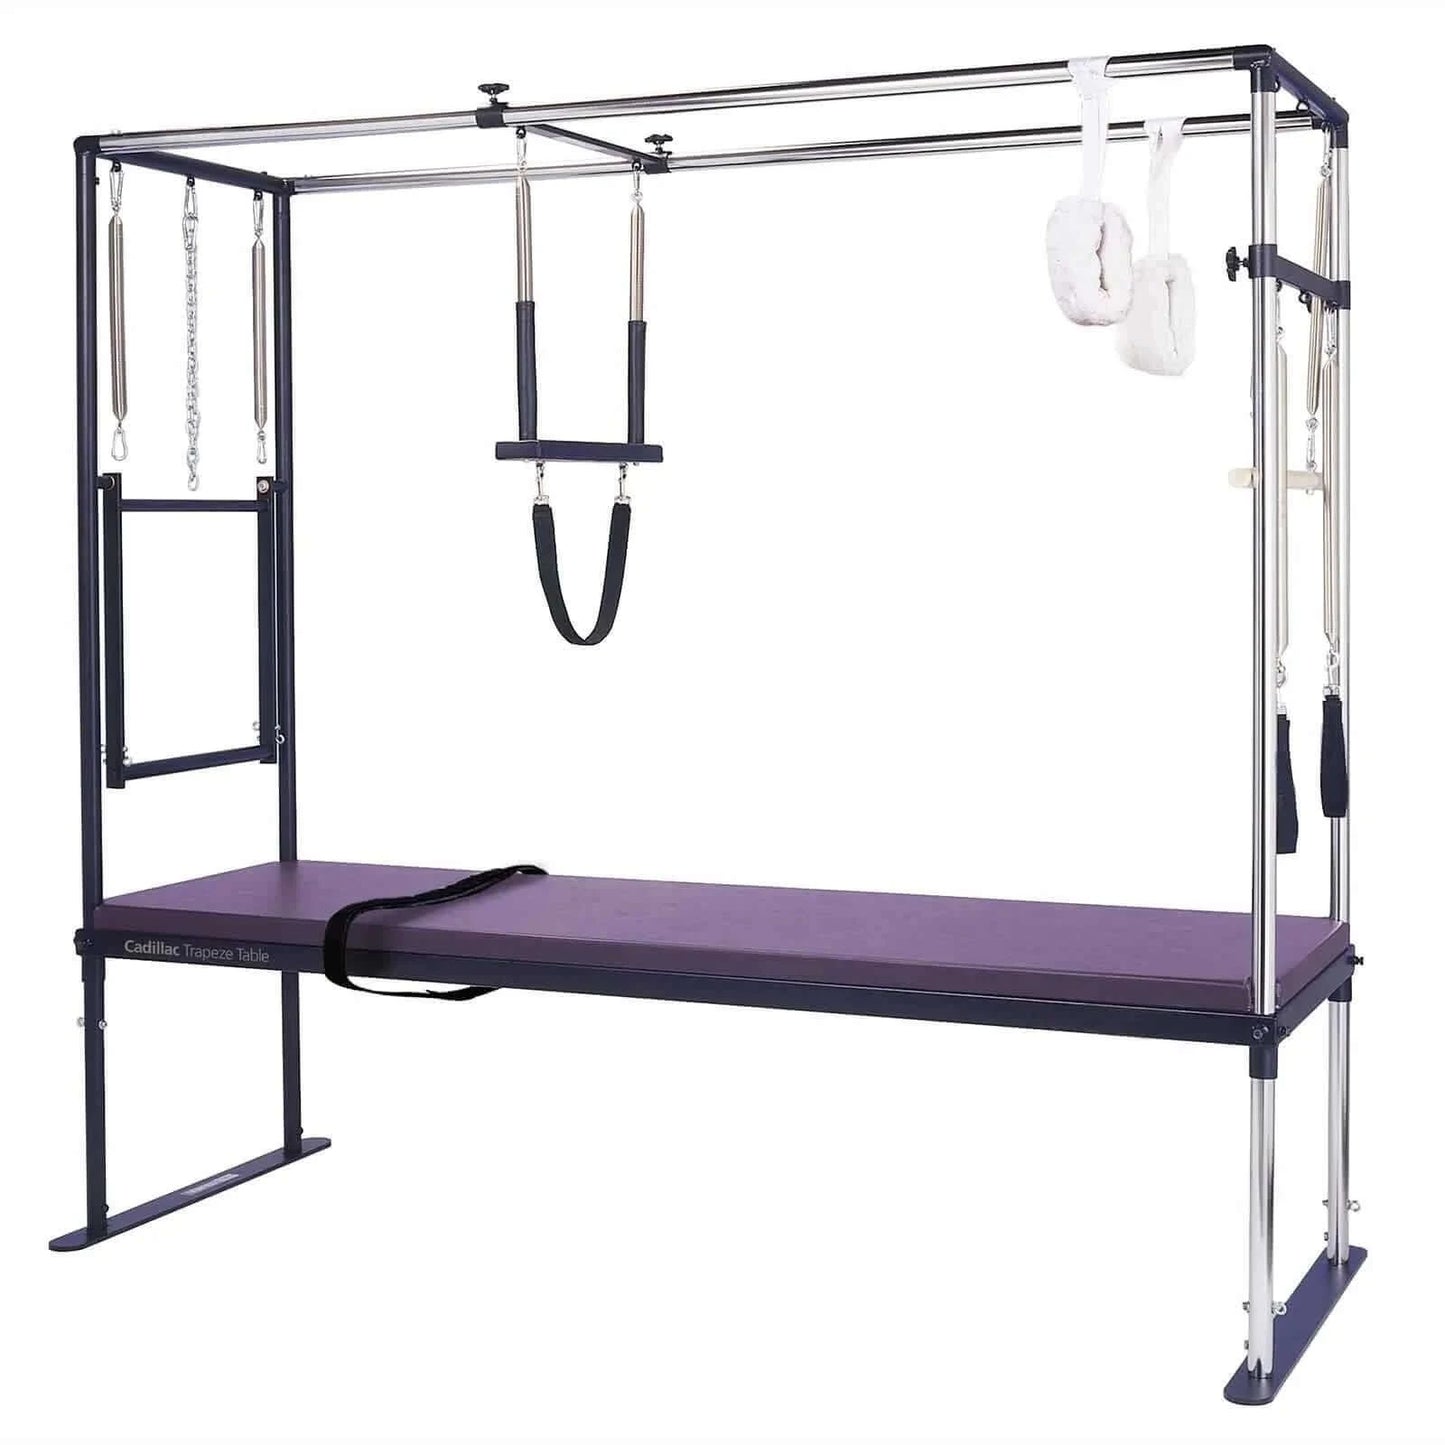 Purple Impulse Merrithew™ Pilates Cadillac / Trapeze Table by Merrithew™ sold by Pilates Matters® by BSP LLC